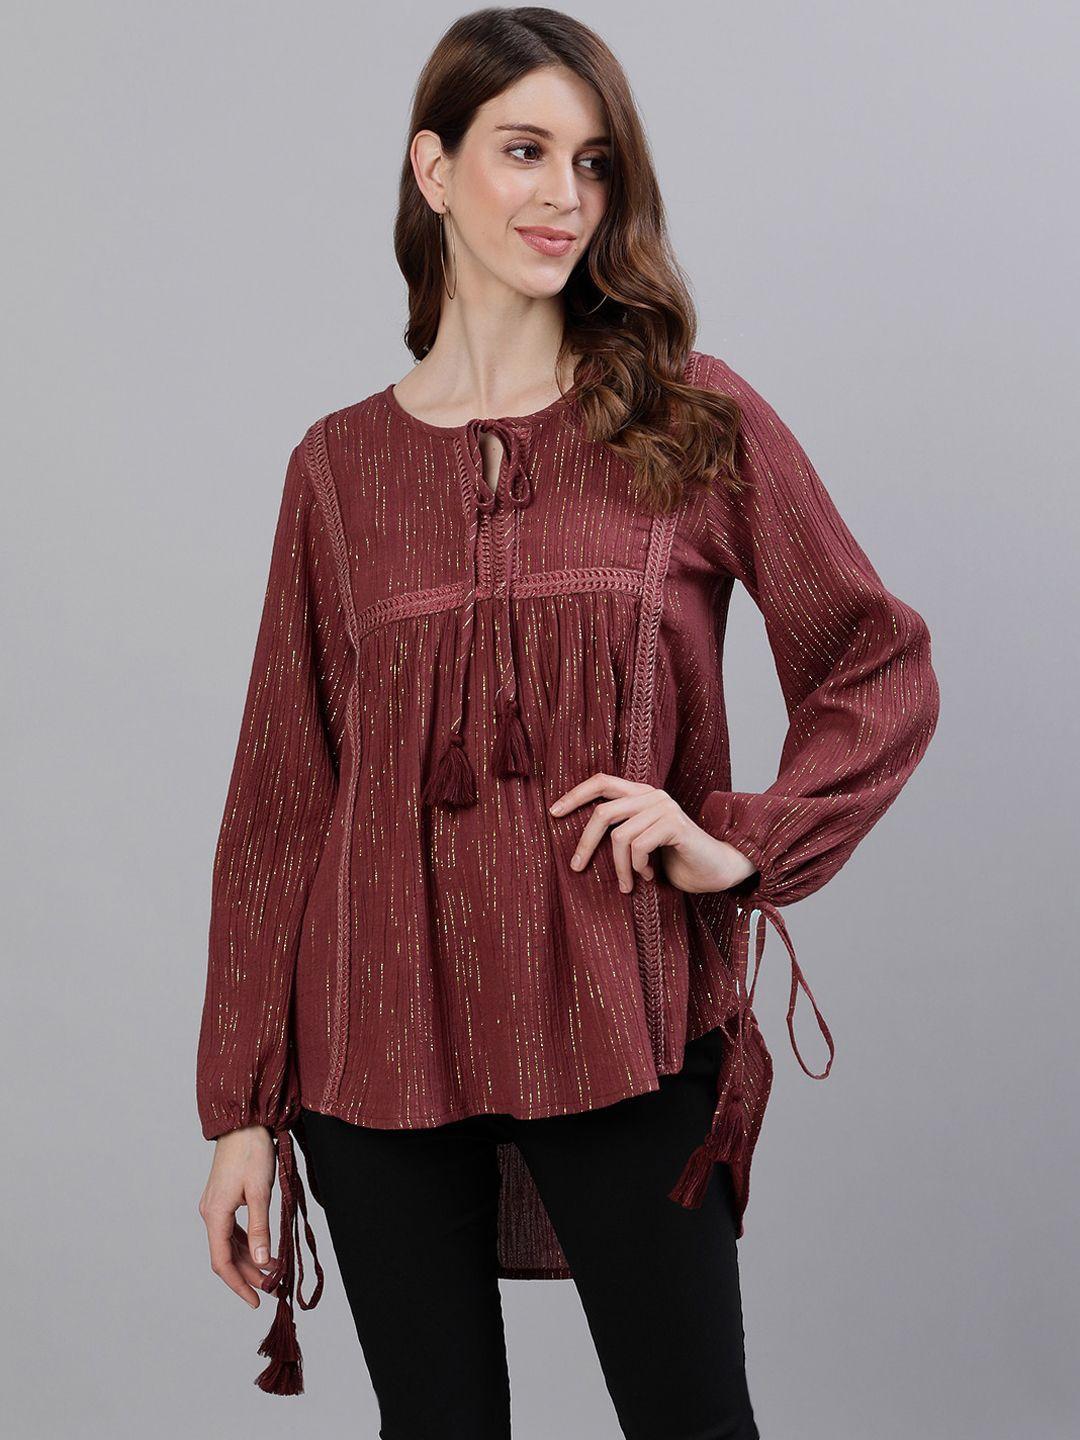 ishin-maroon-striped-tie-up-neck-puff-sleeves-high-low-top